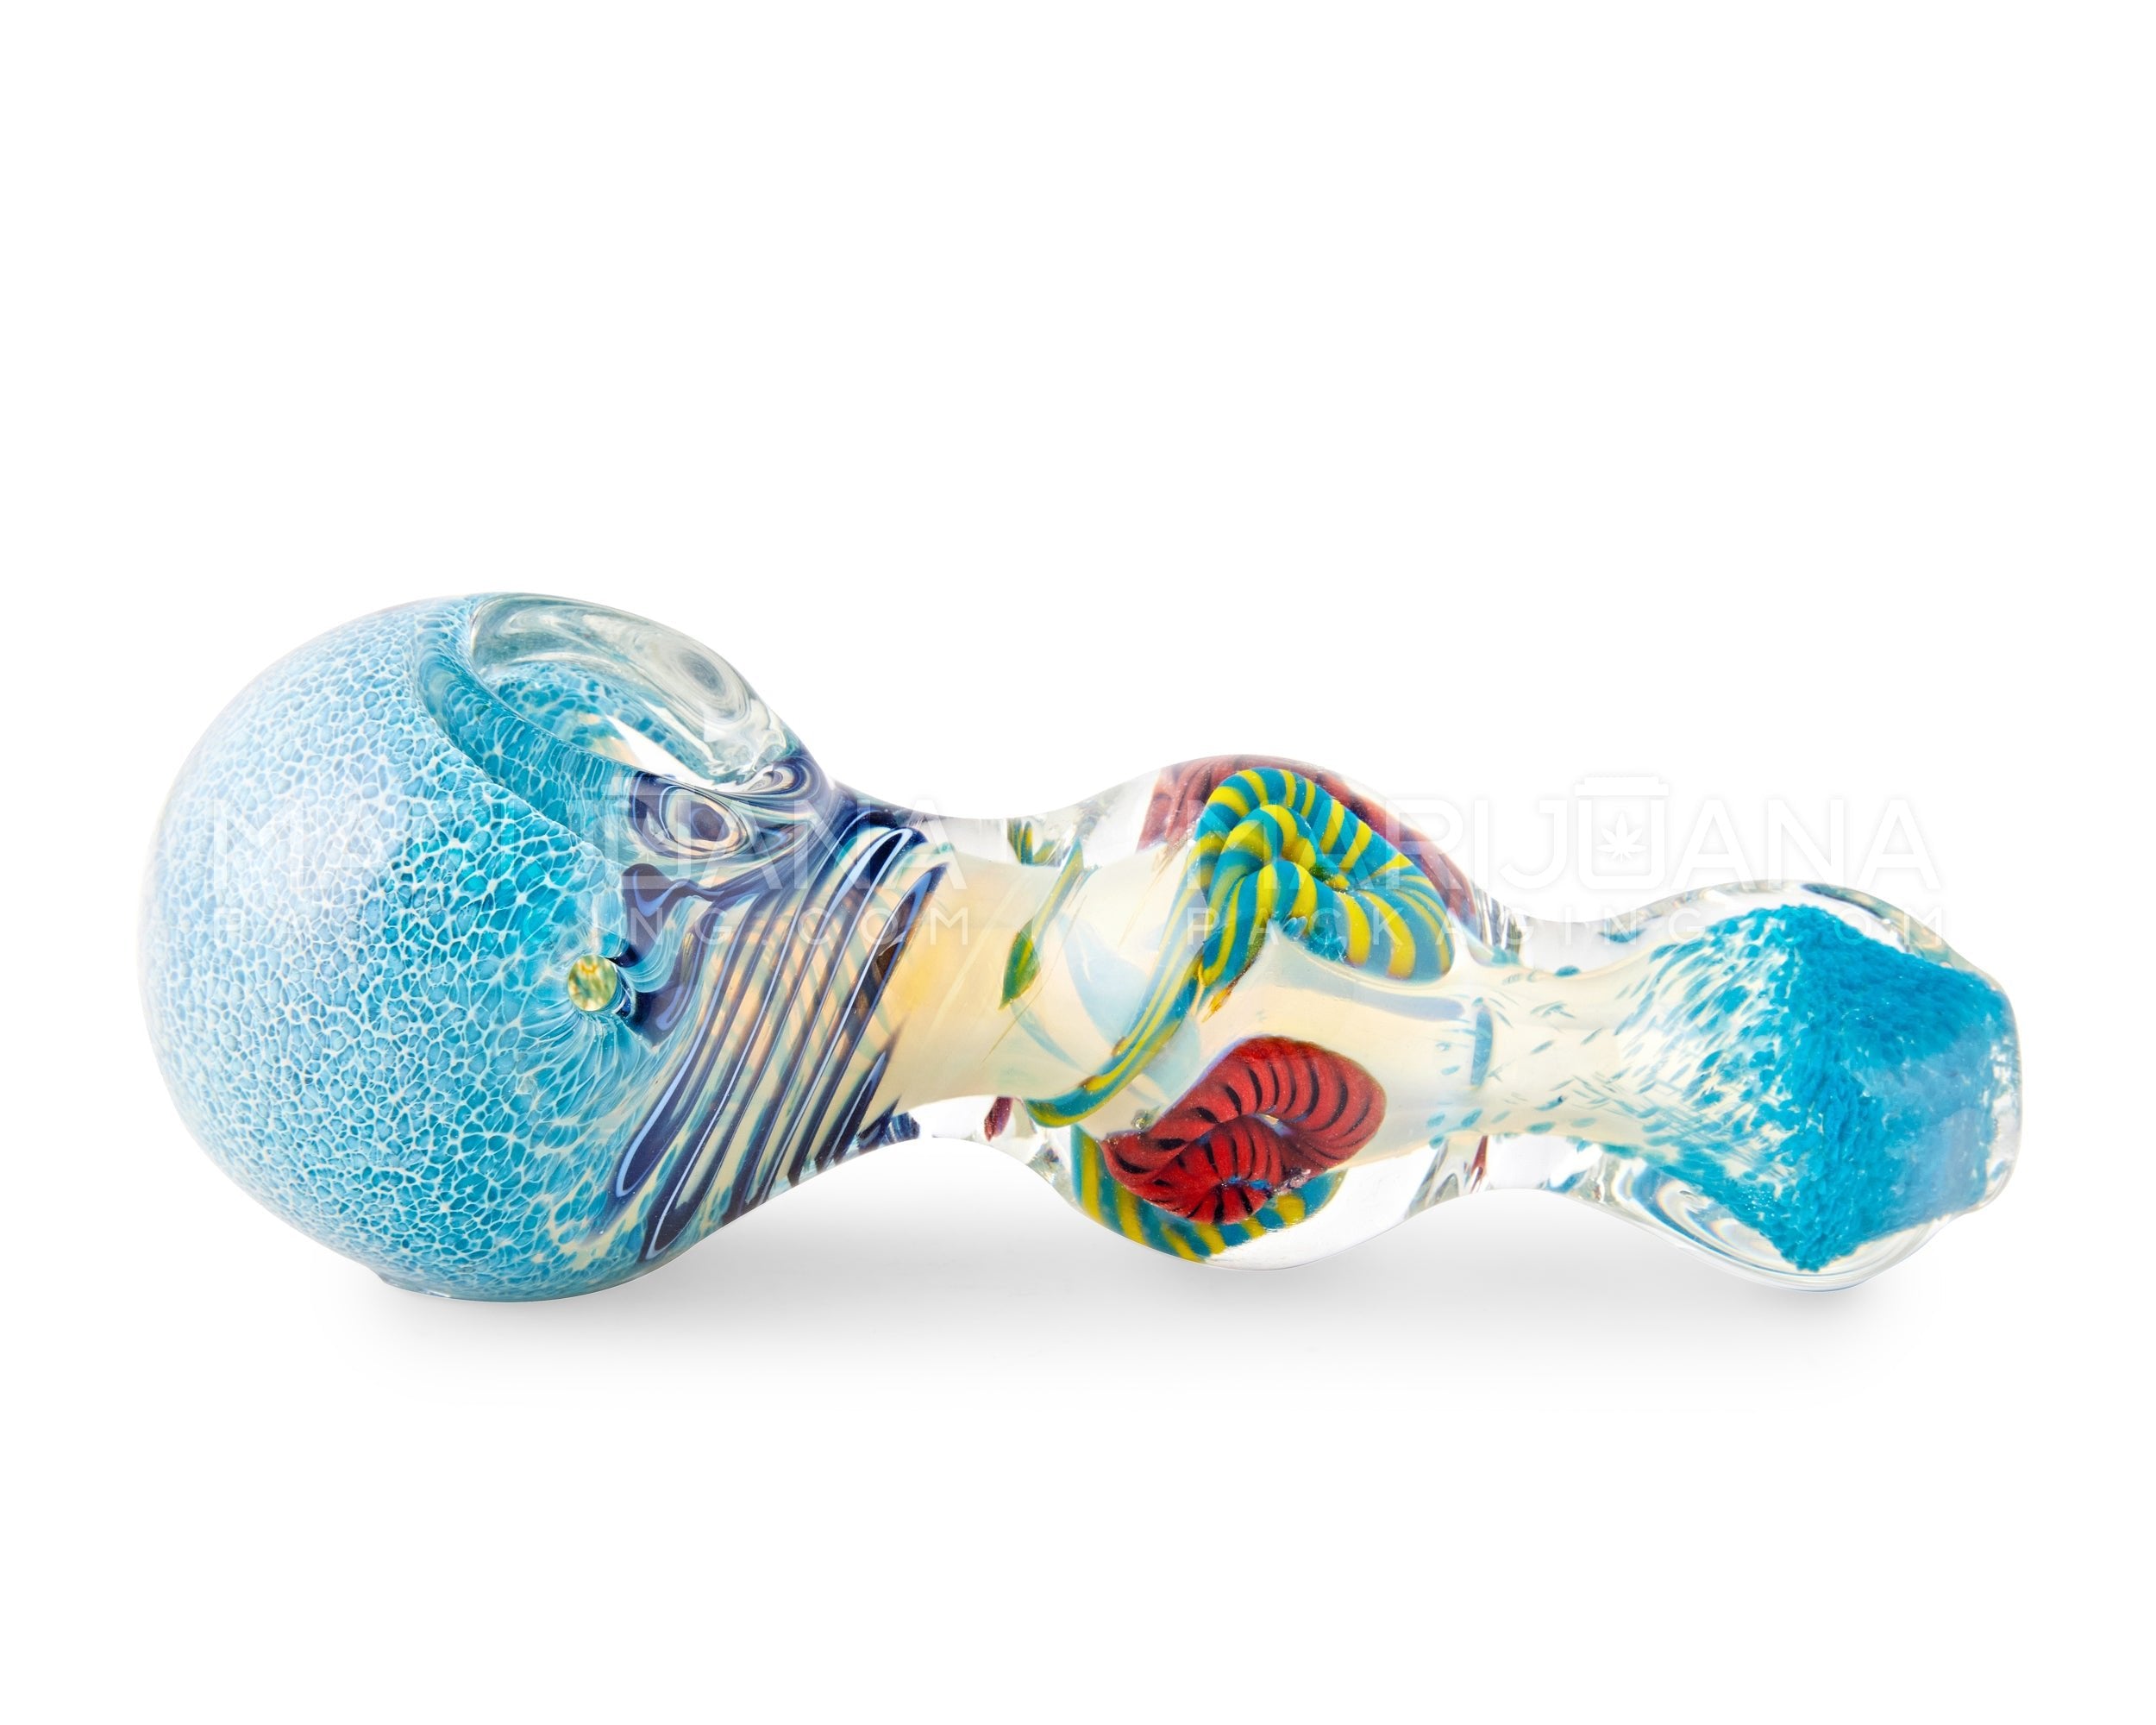 Frit & Fumed Spoon Hand Pipe w/ Ribboning | 4.5in Long - Glass - Assorted - 4